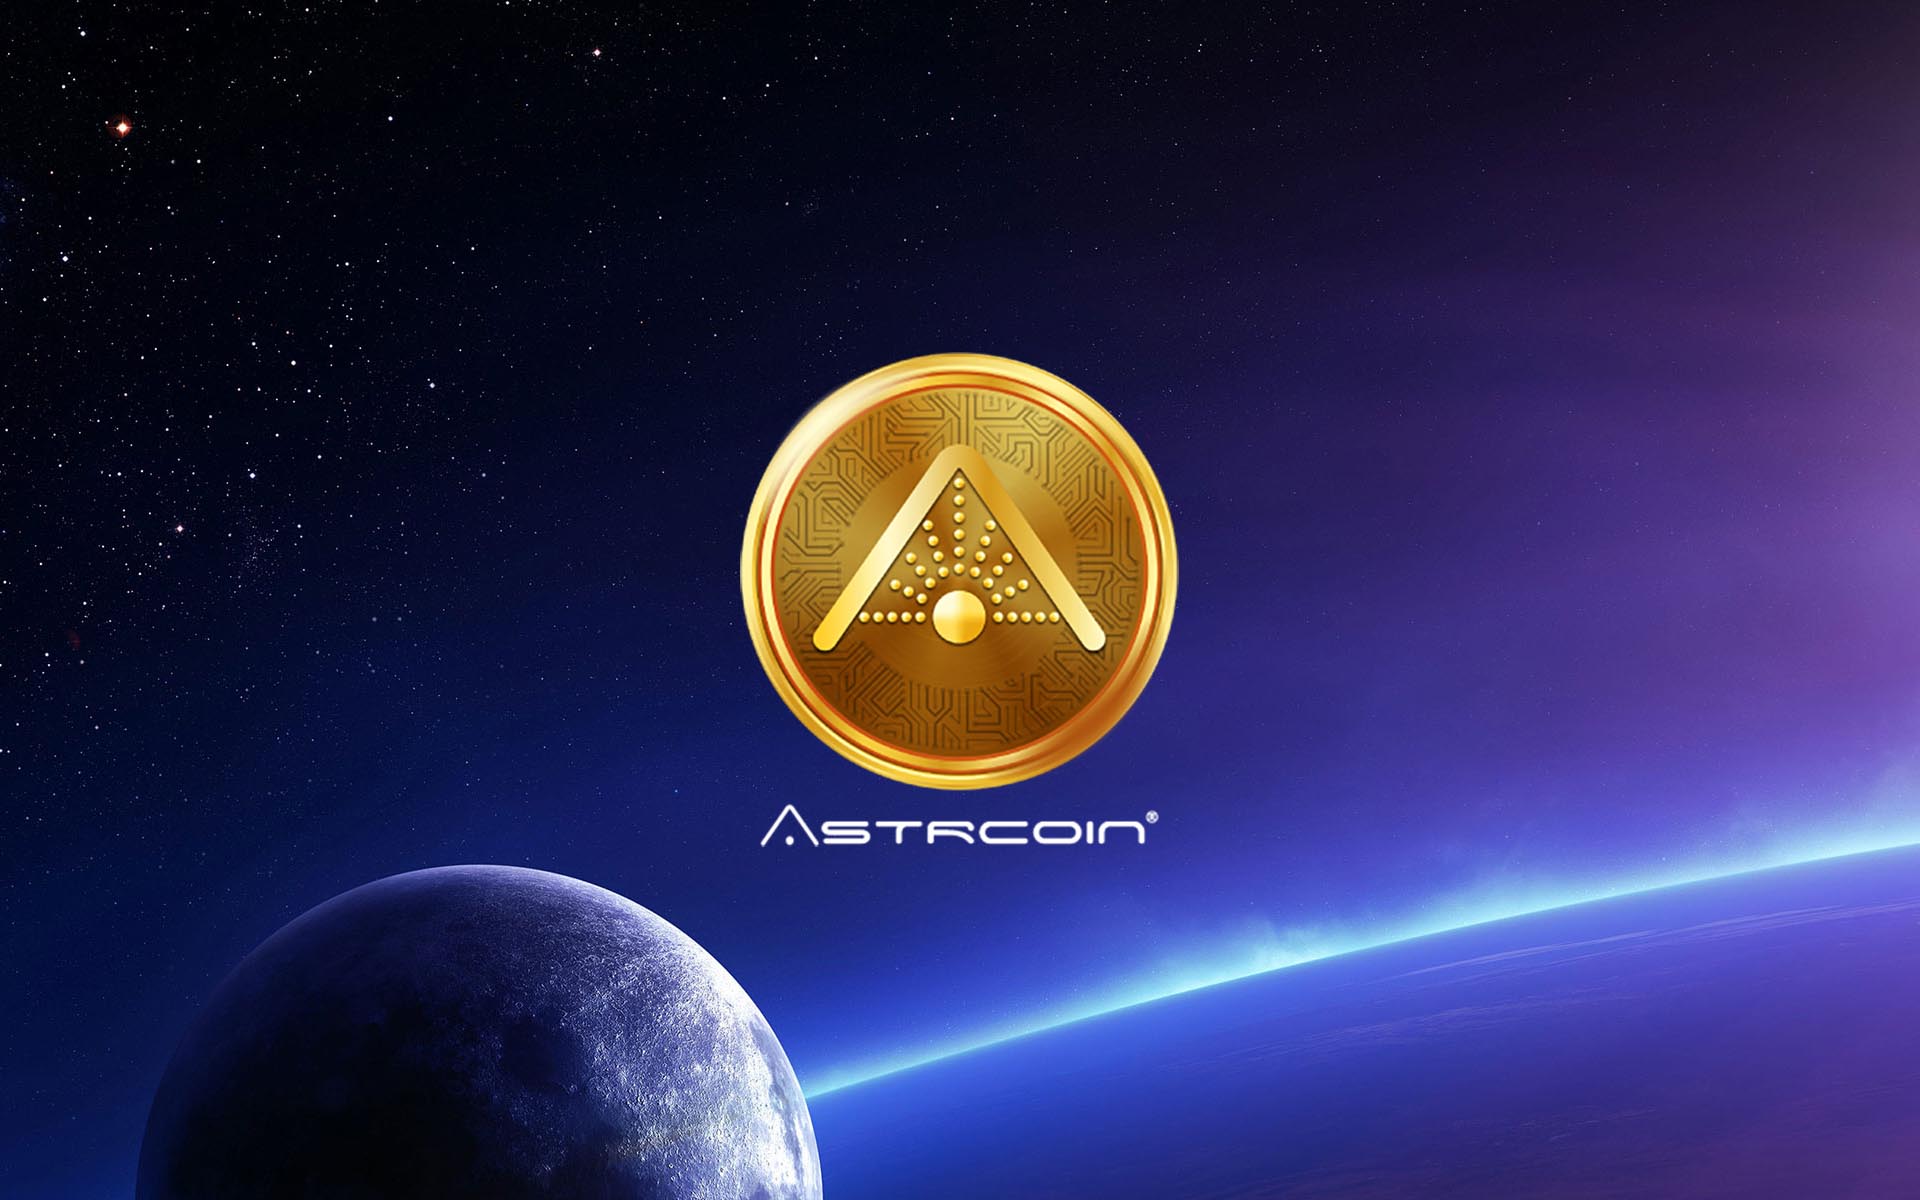 AstrCoin® Launches Groundbreaking ICO That Will Enhance Space Exploration Forever & Allow Anyone To Lay Claim To Asteroids Worth Billions In Natural Resources